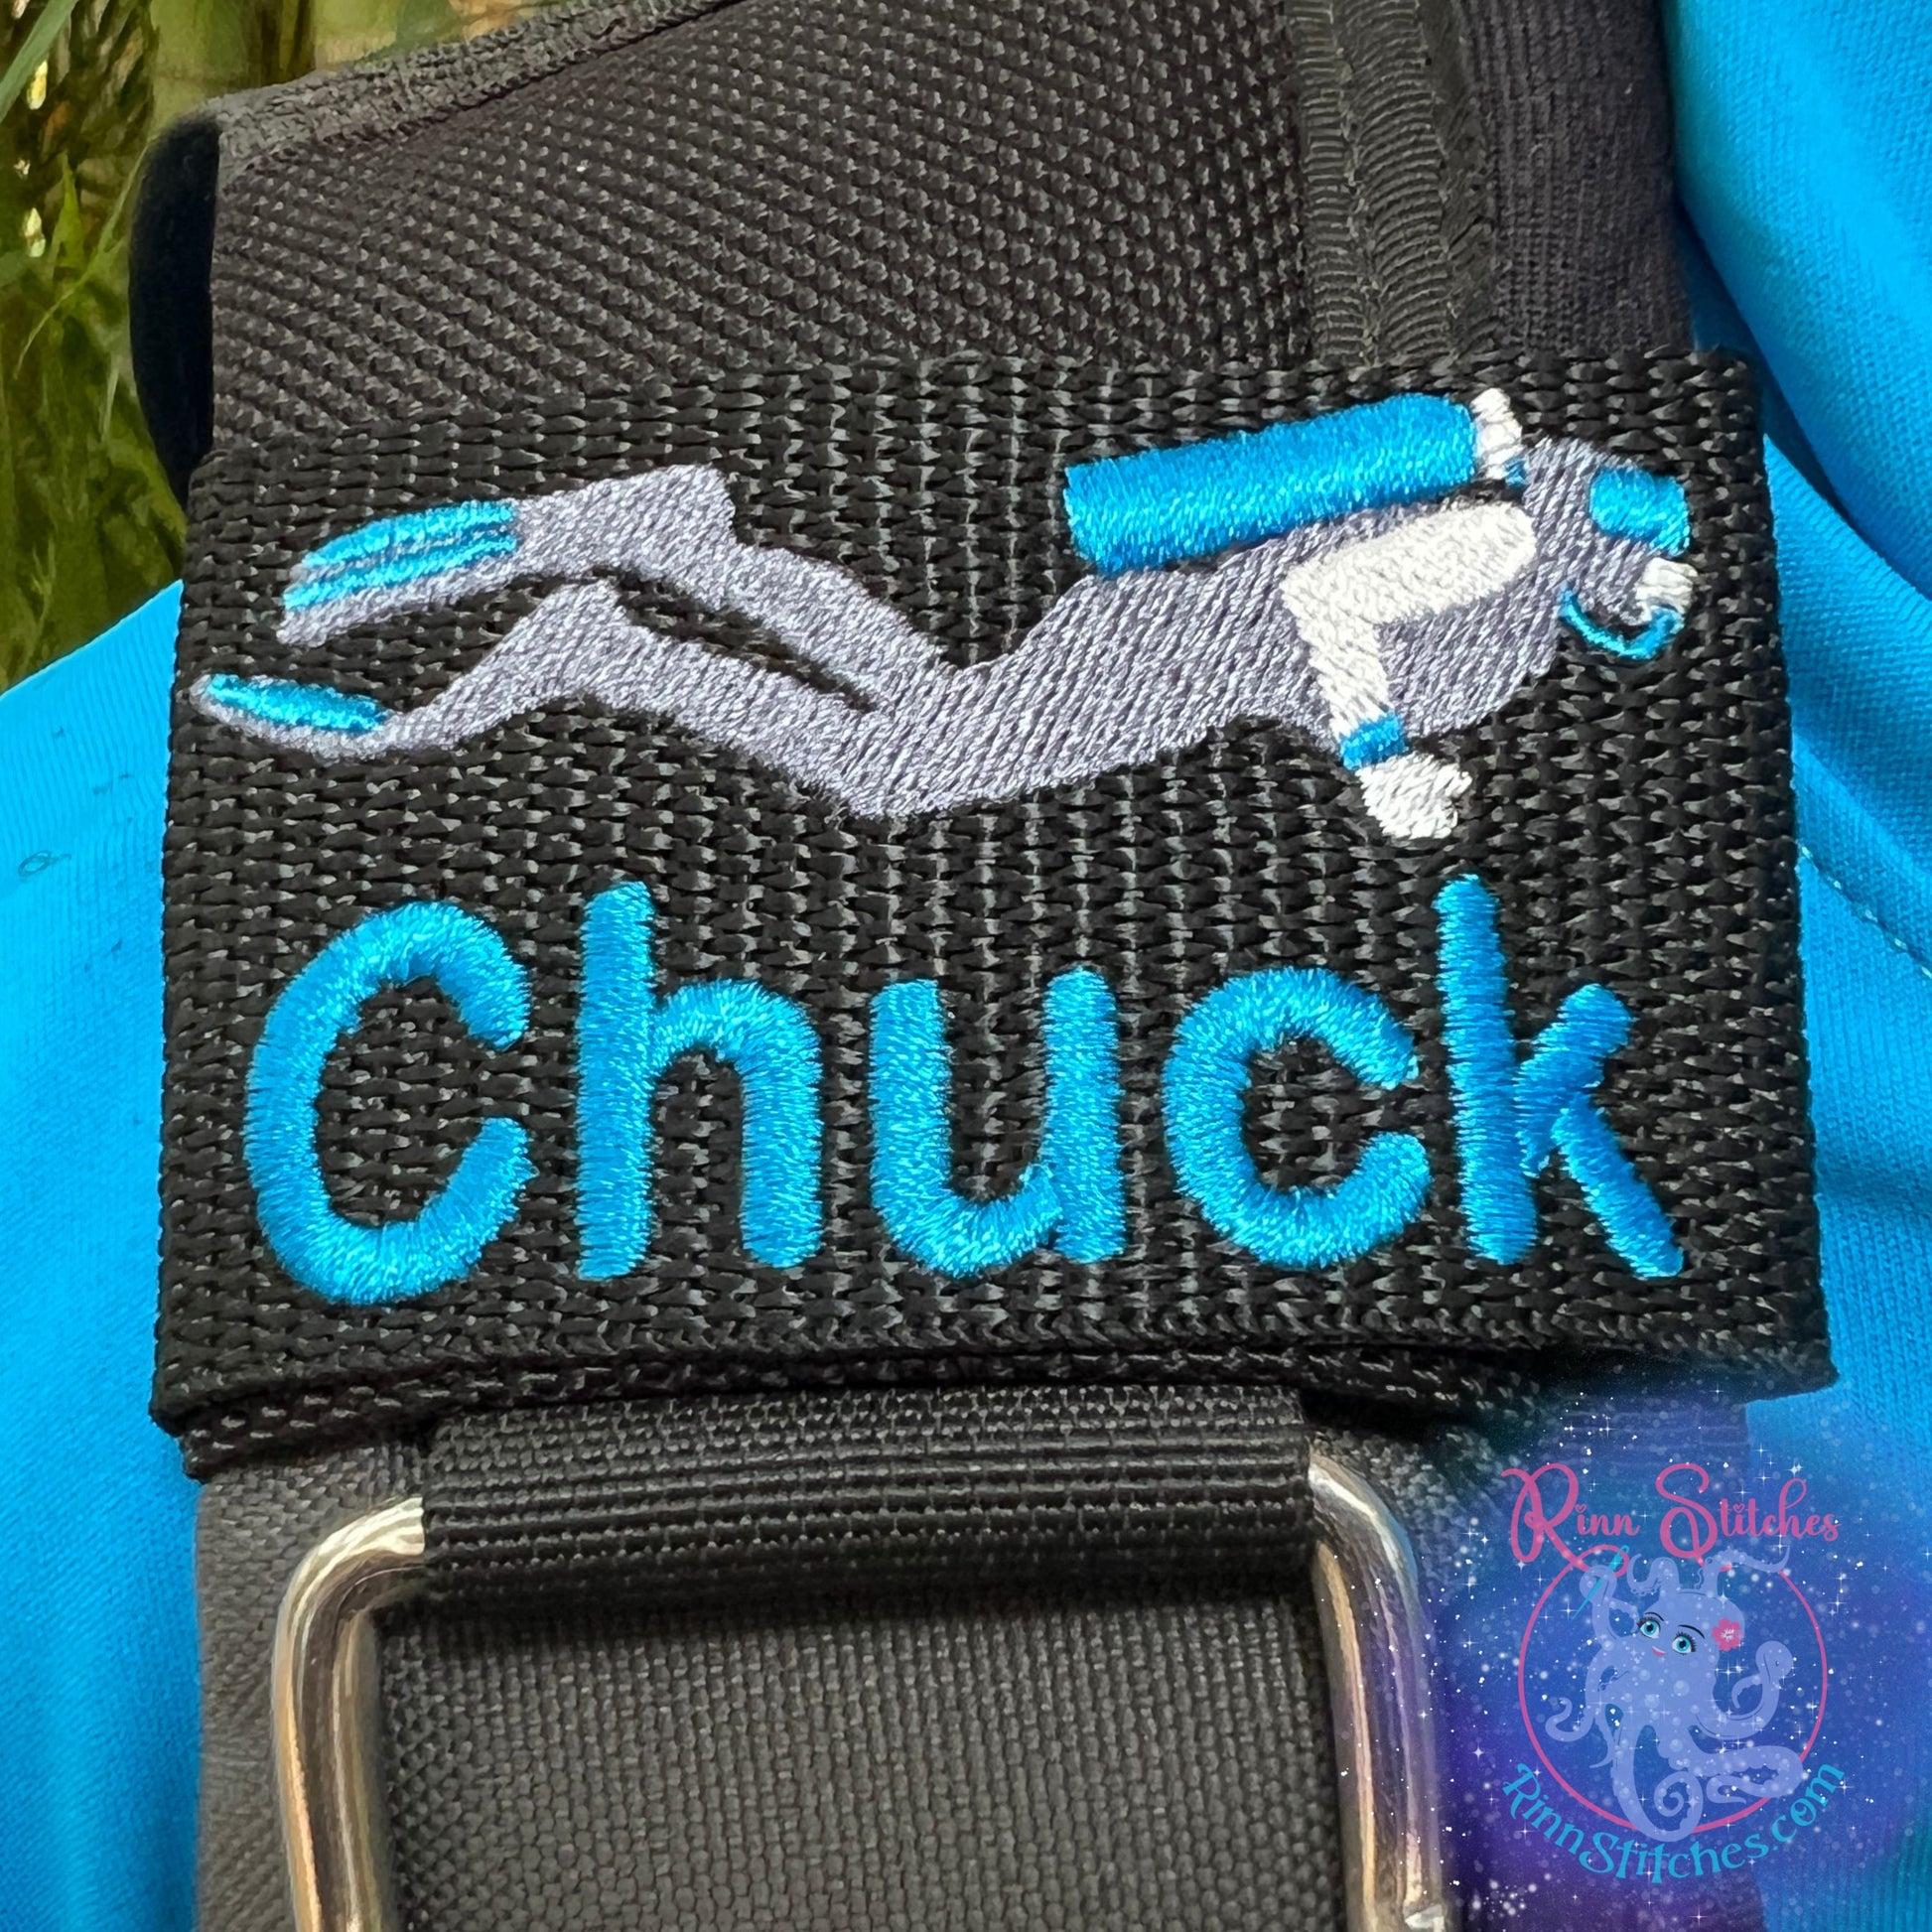 Scuba Diver Personalized BCD Tag - Scuba Dude - Scuba Chick - By Rinn Stitches on Maui, Hawaii